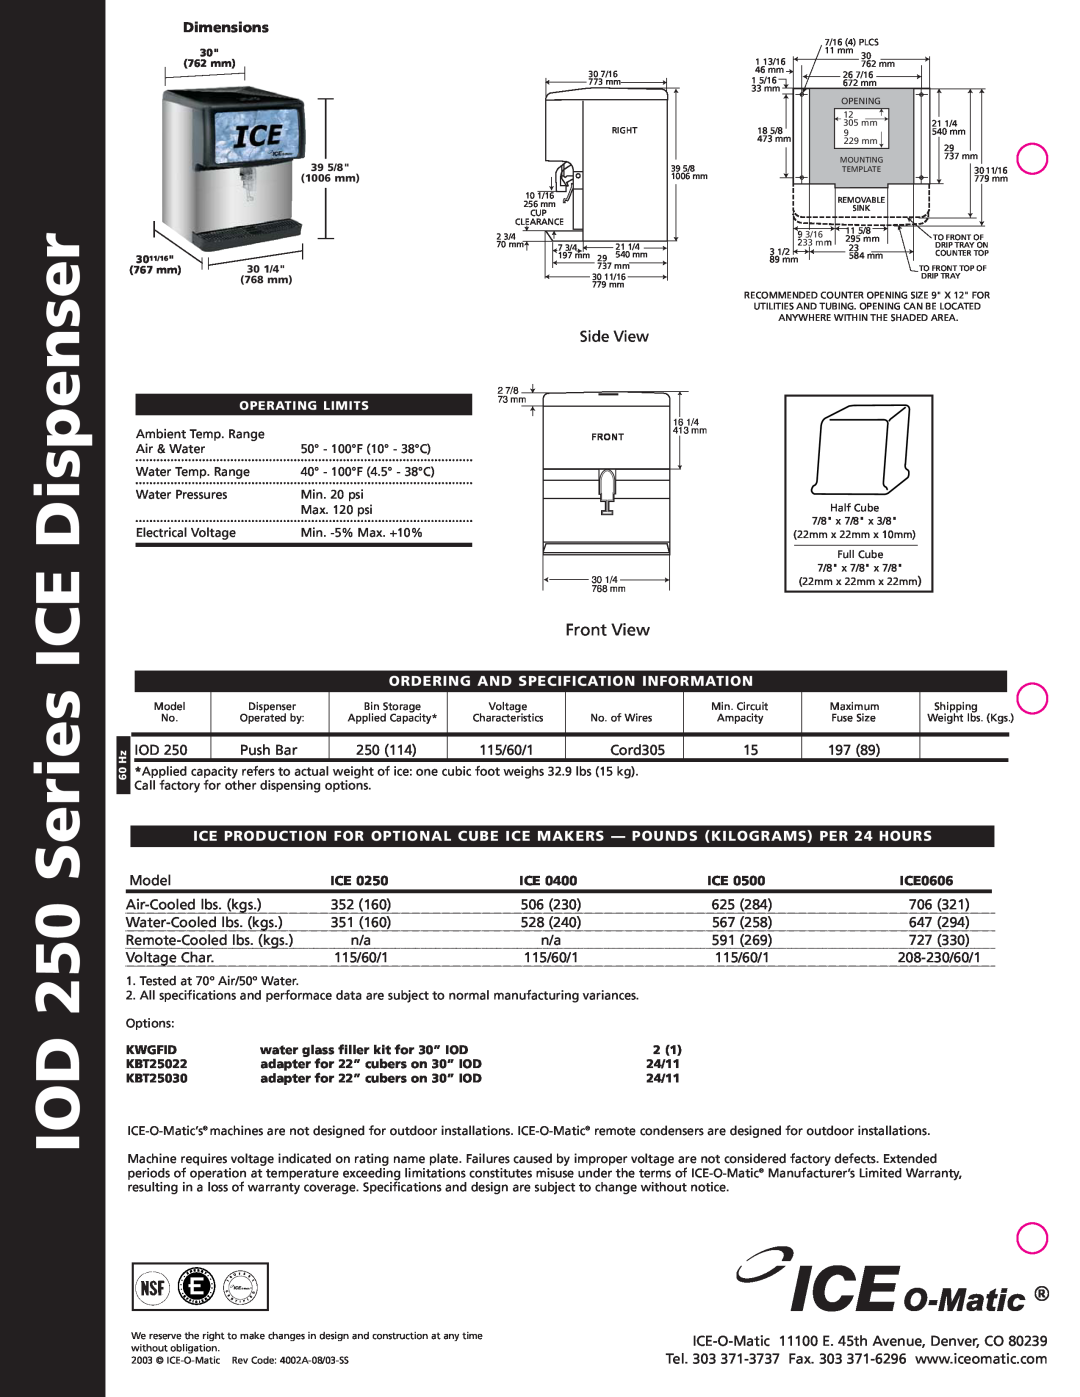 Ice-O-Matic IOD 250 Series ICE Dispenser, Front View, Side View, Dimensions, Ordering And Specification Information 